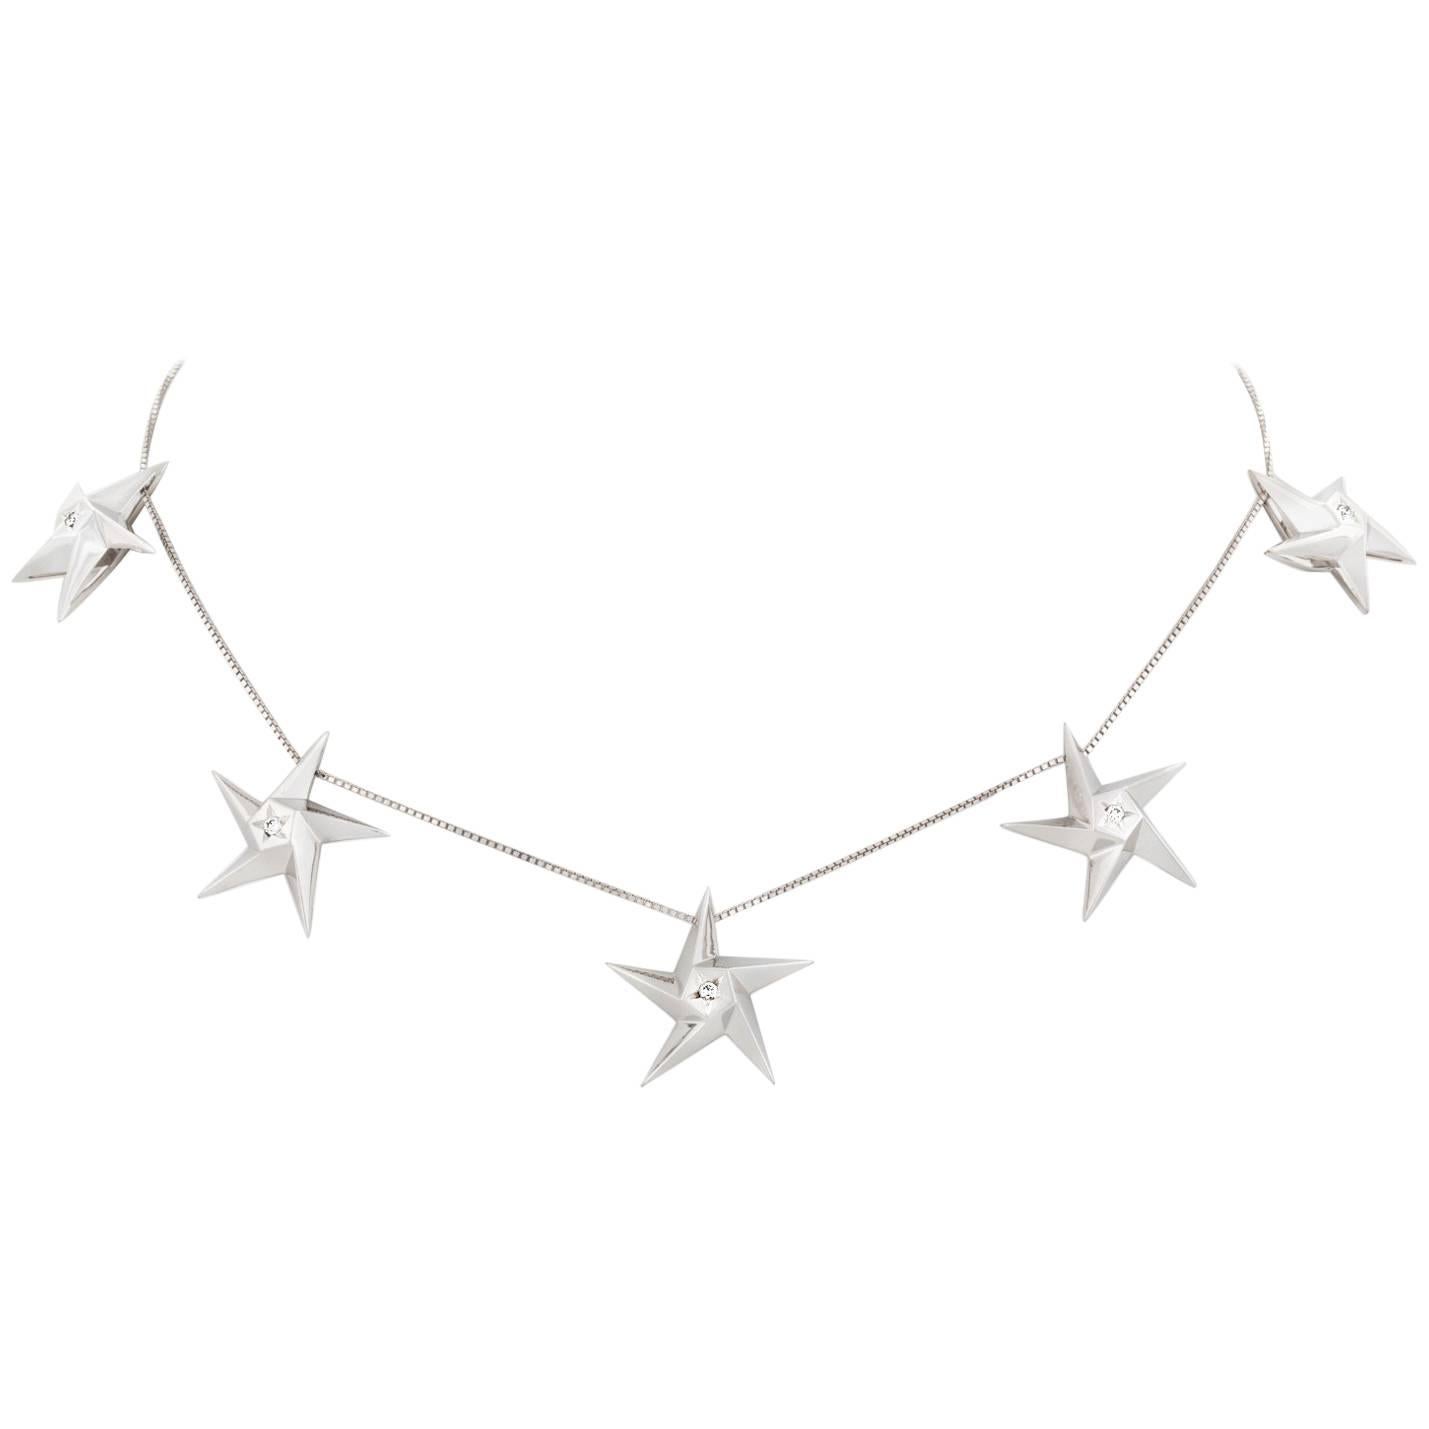 Daou  Diamond Star Necklace in White Gold a collar choker style necklace  For Sale